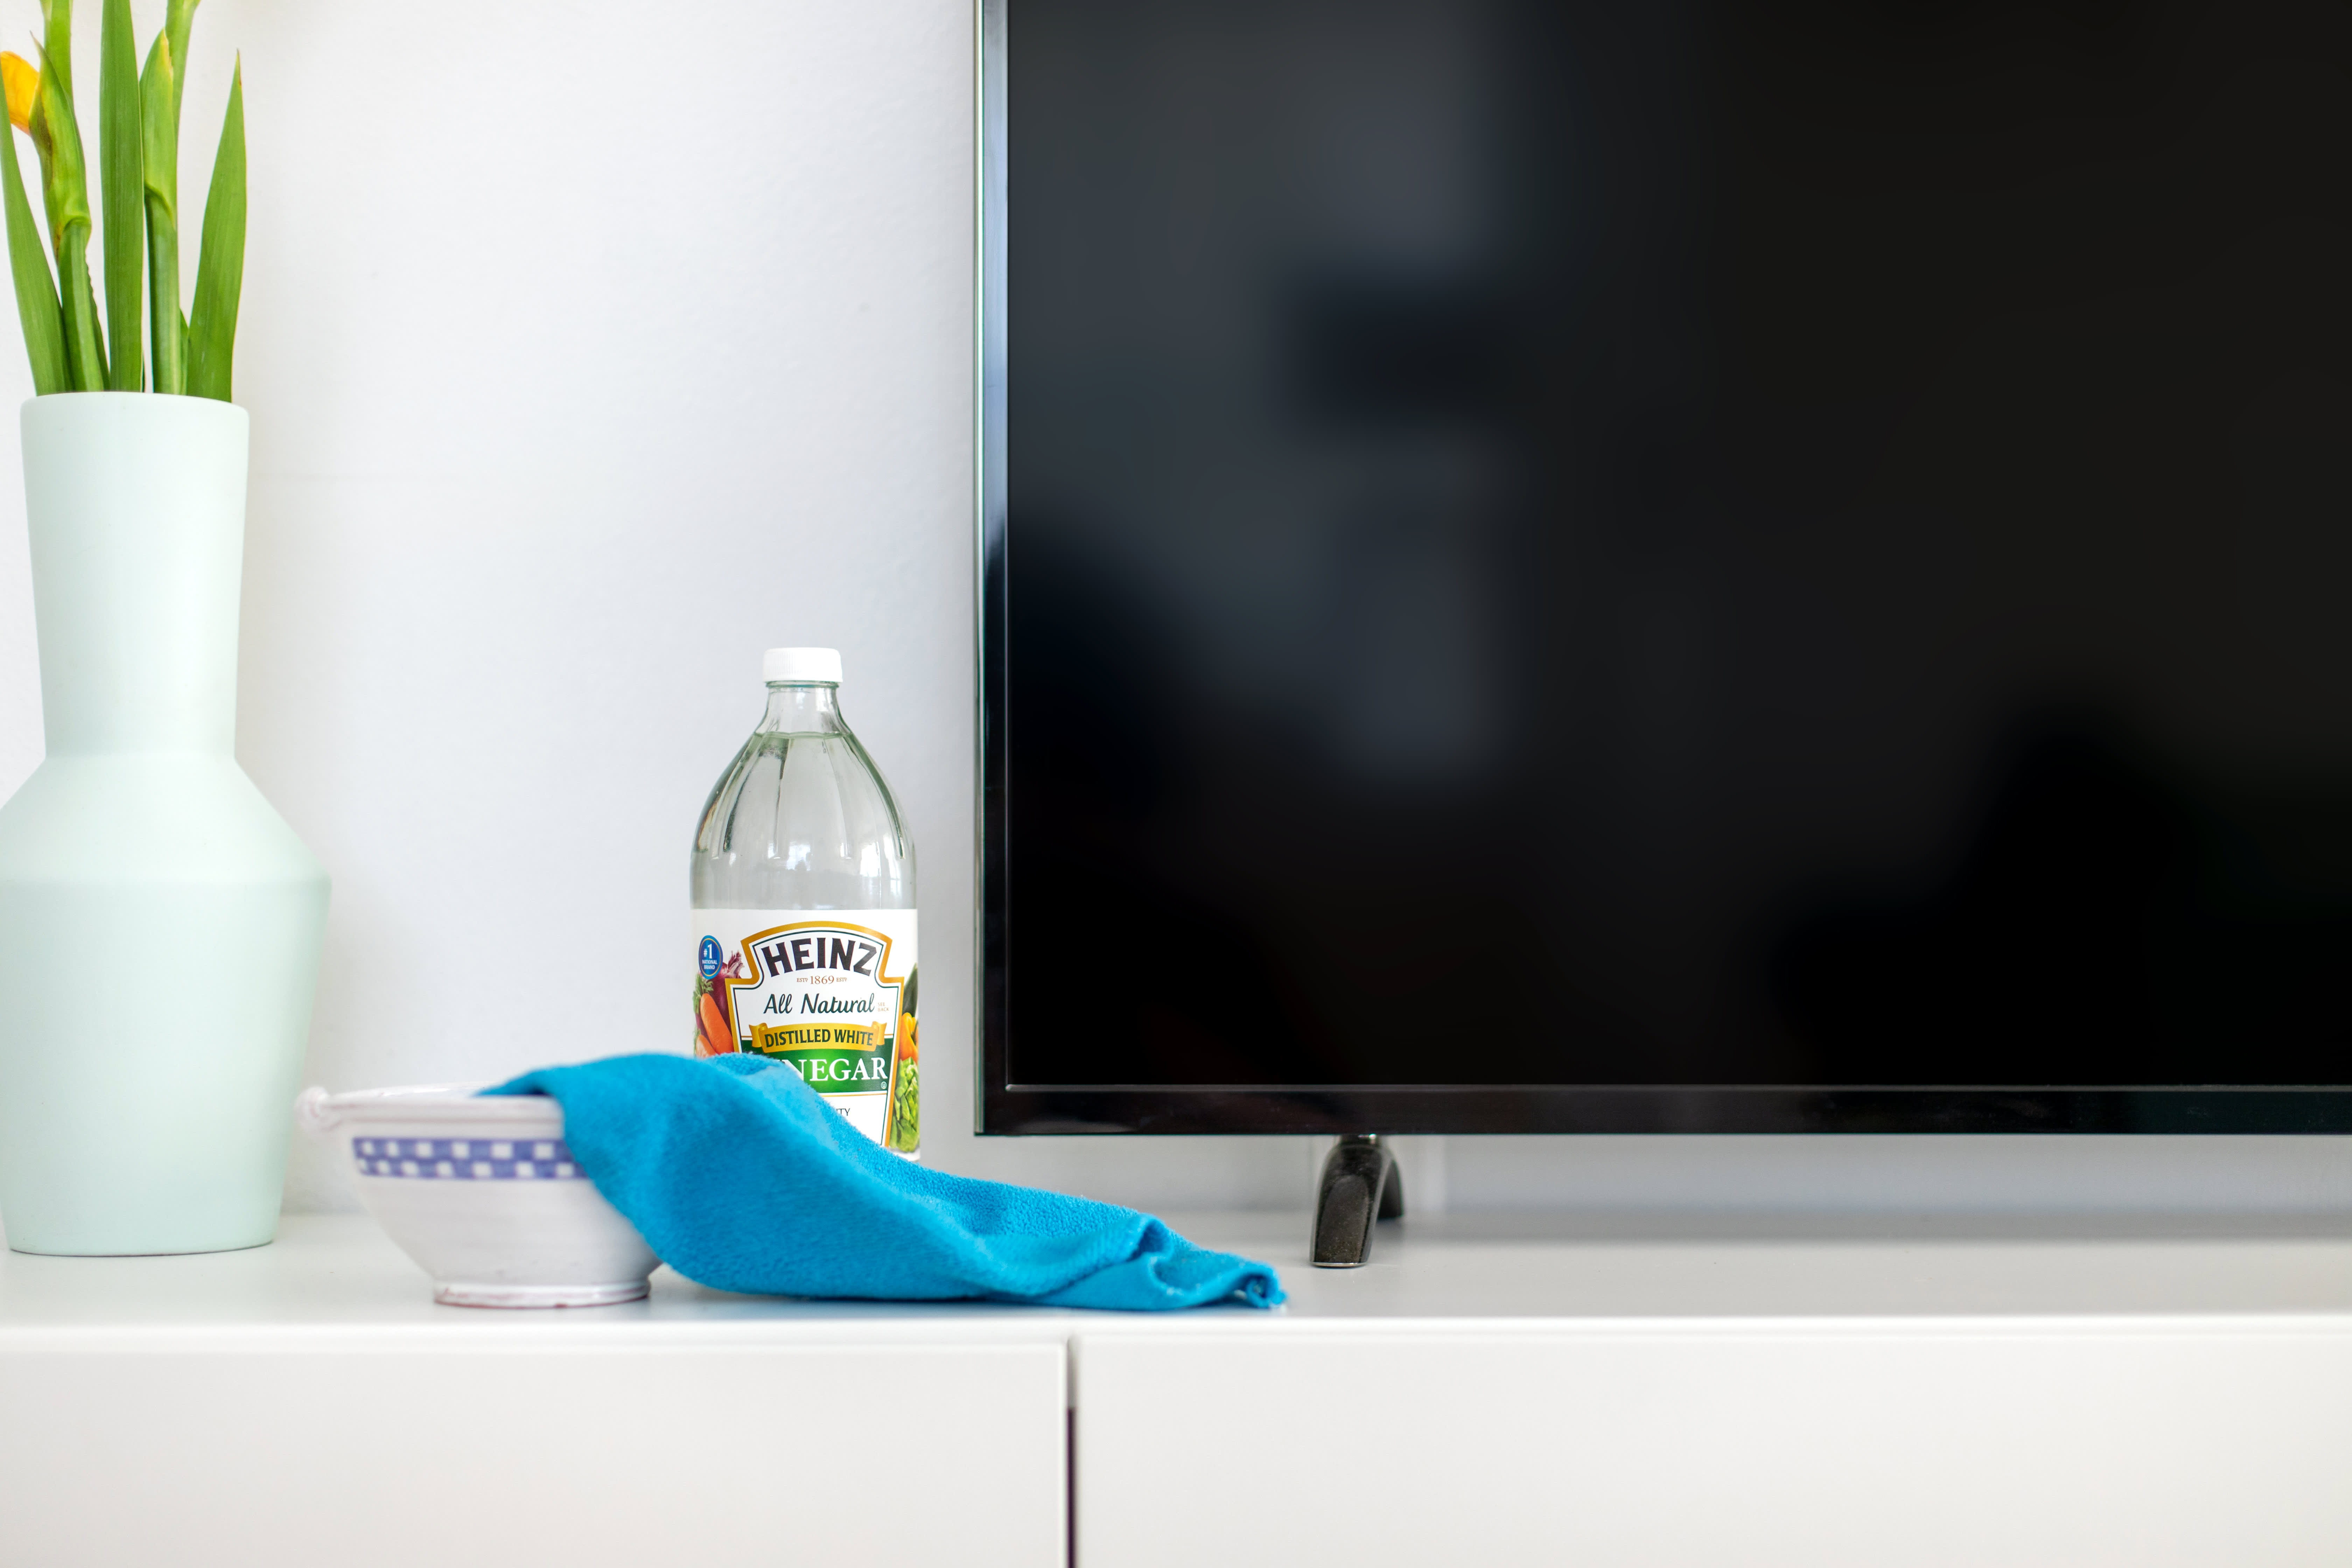 How To Clean a TV Screen Using Things You Already Have  Kitchn